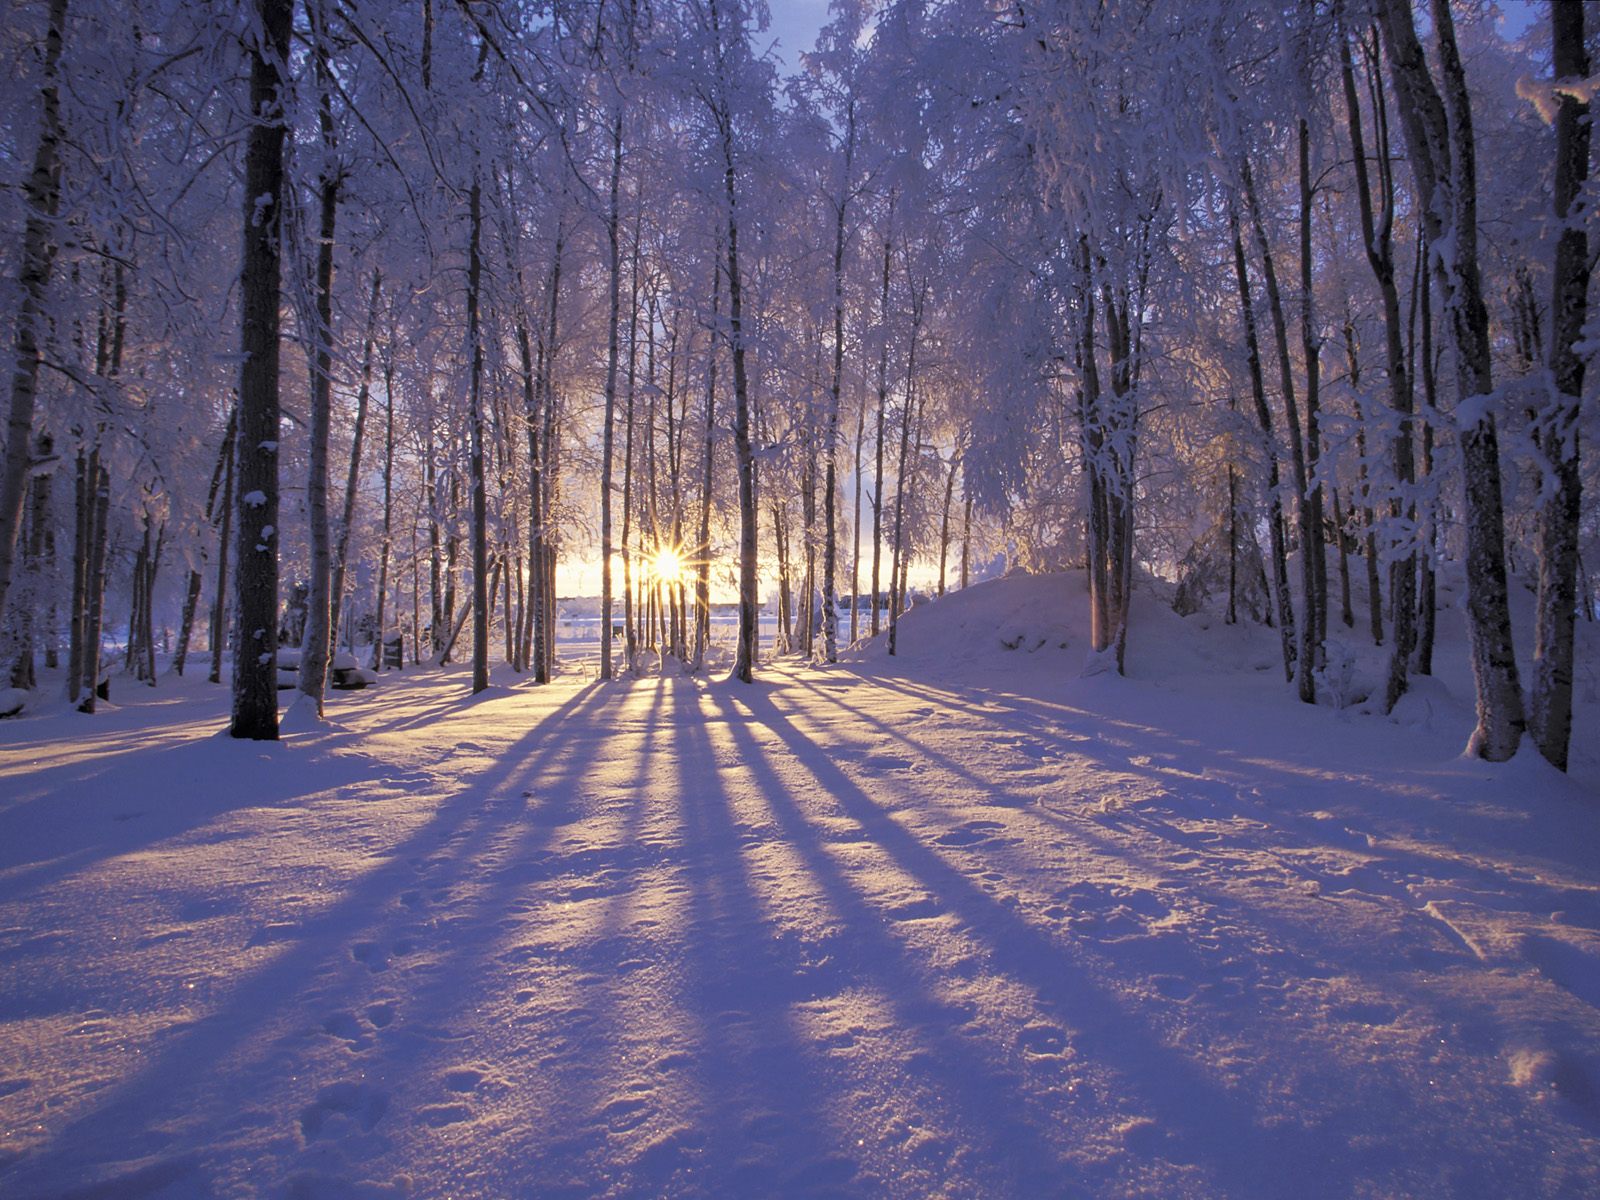 Winter Solstice 2017: The First Day of Winter | Facts, Folklore, and ...